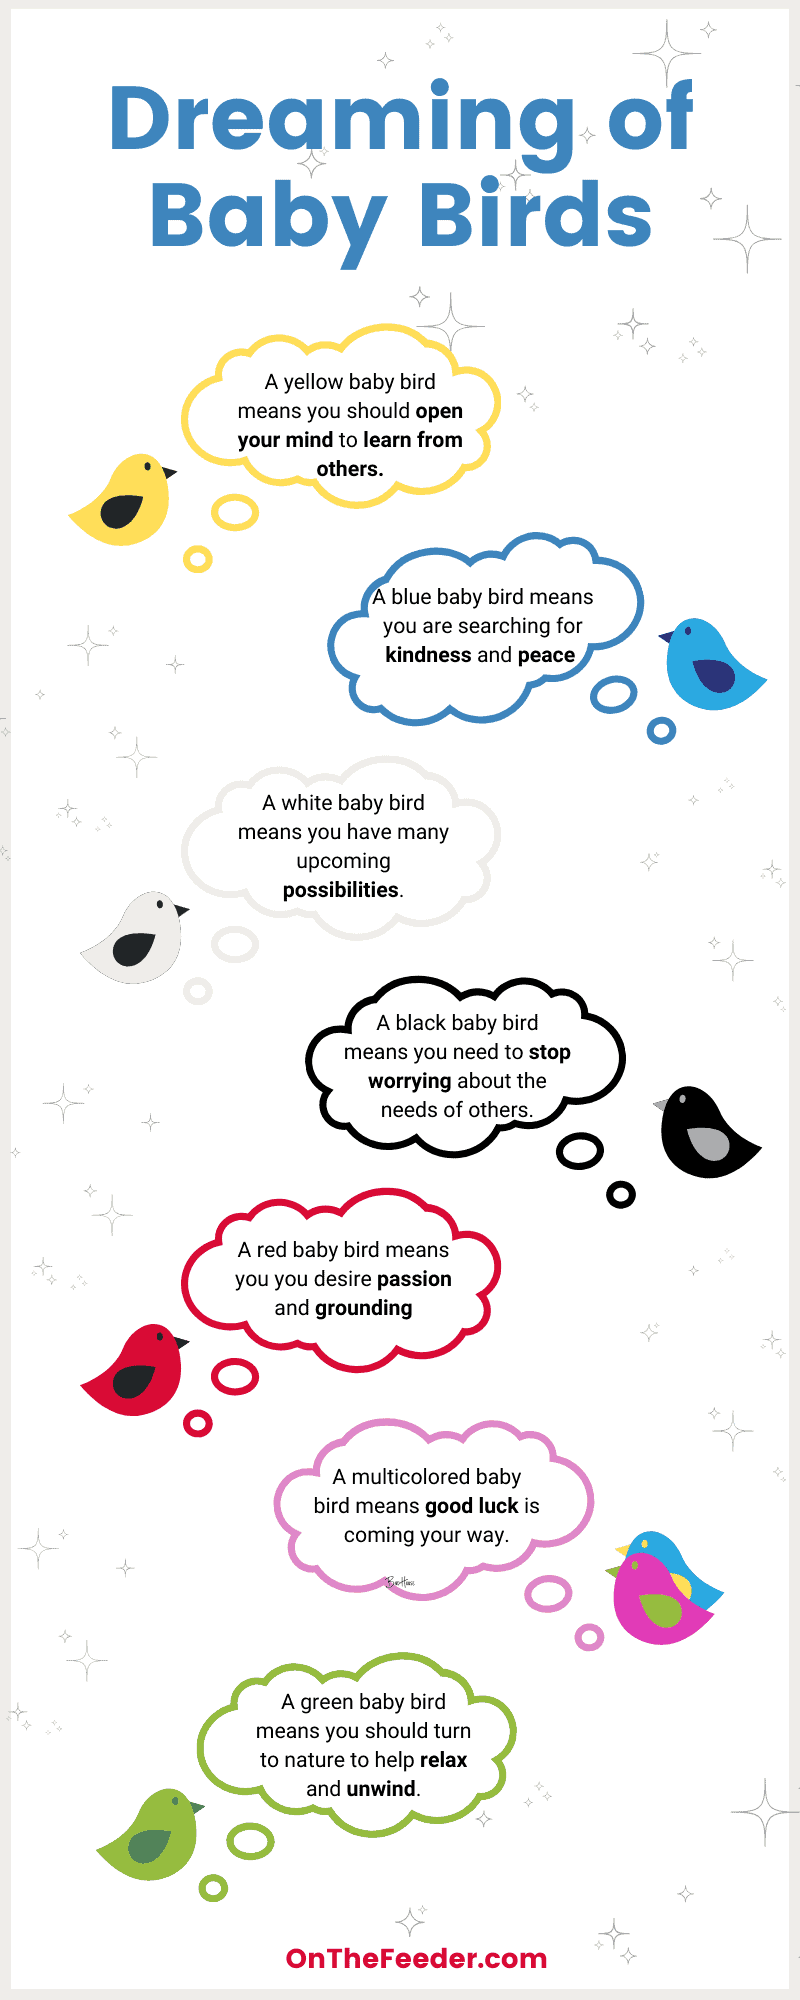 Graphic showing different colored baby birds and the meaning associated with dreaming of them.